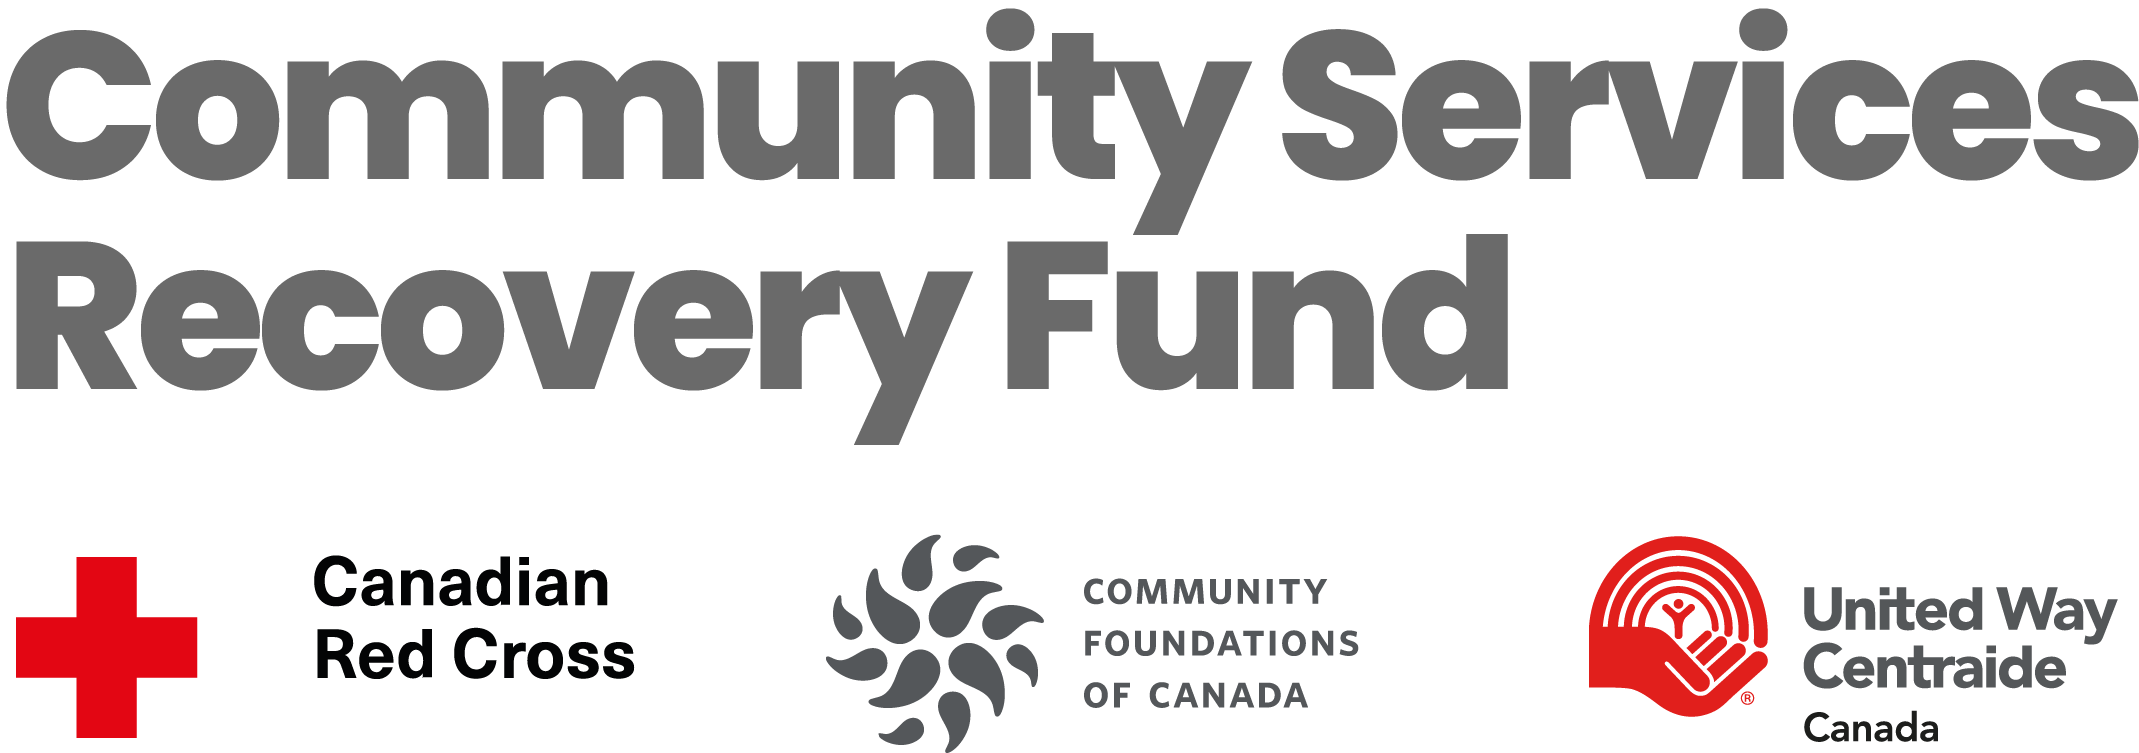 Community Services Recovery Fund